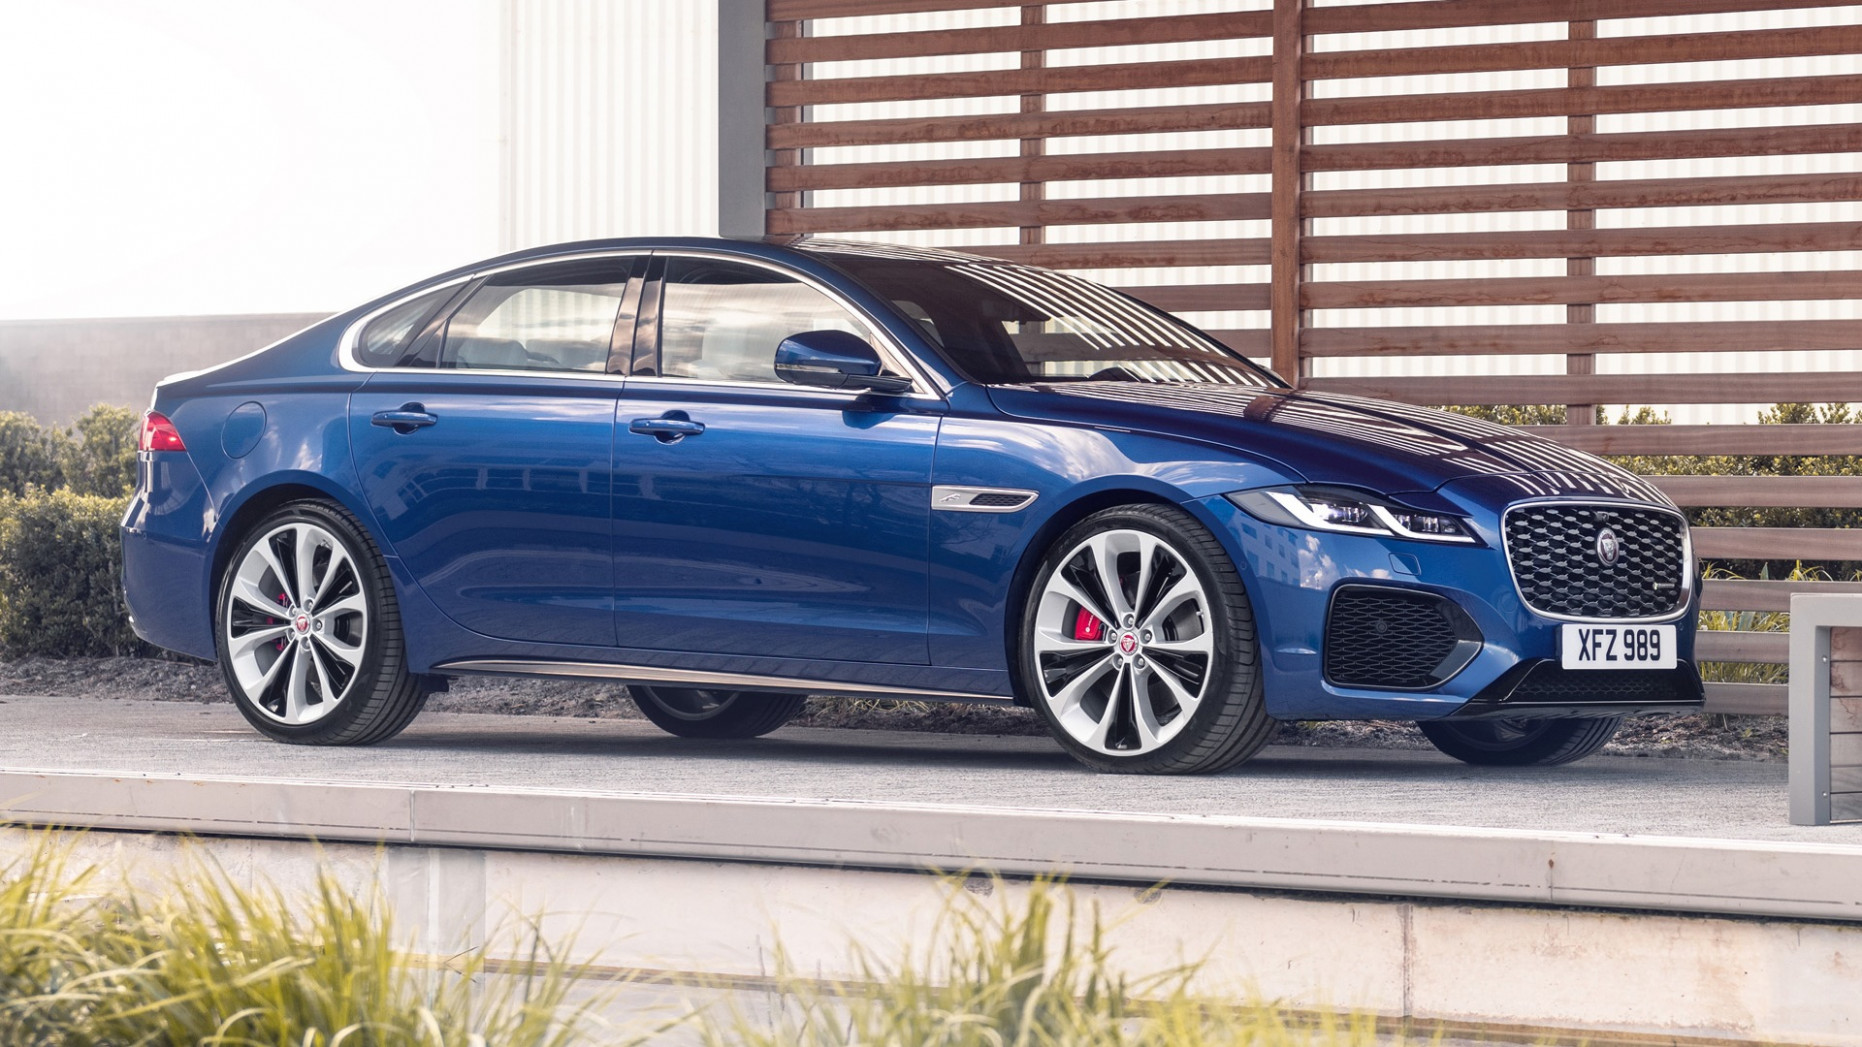 Redesign and Concept 2023 Jaguar Xf Rs